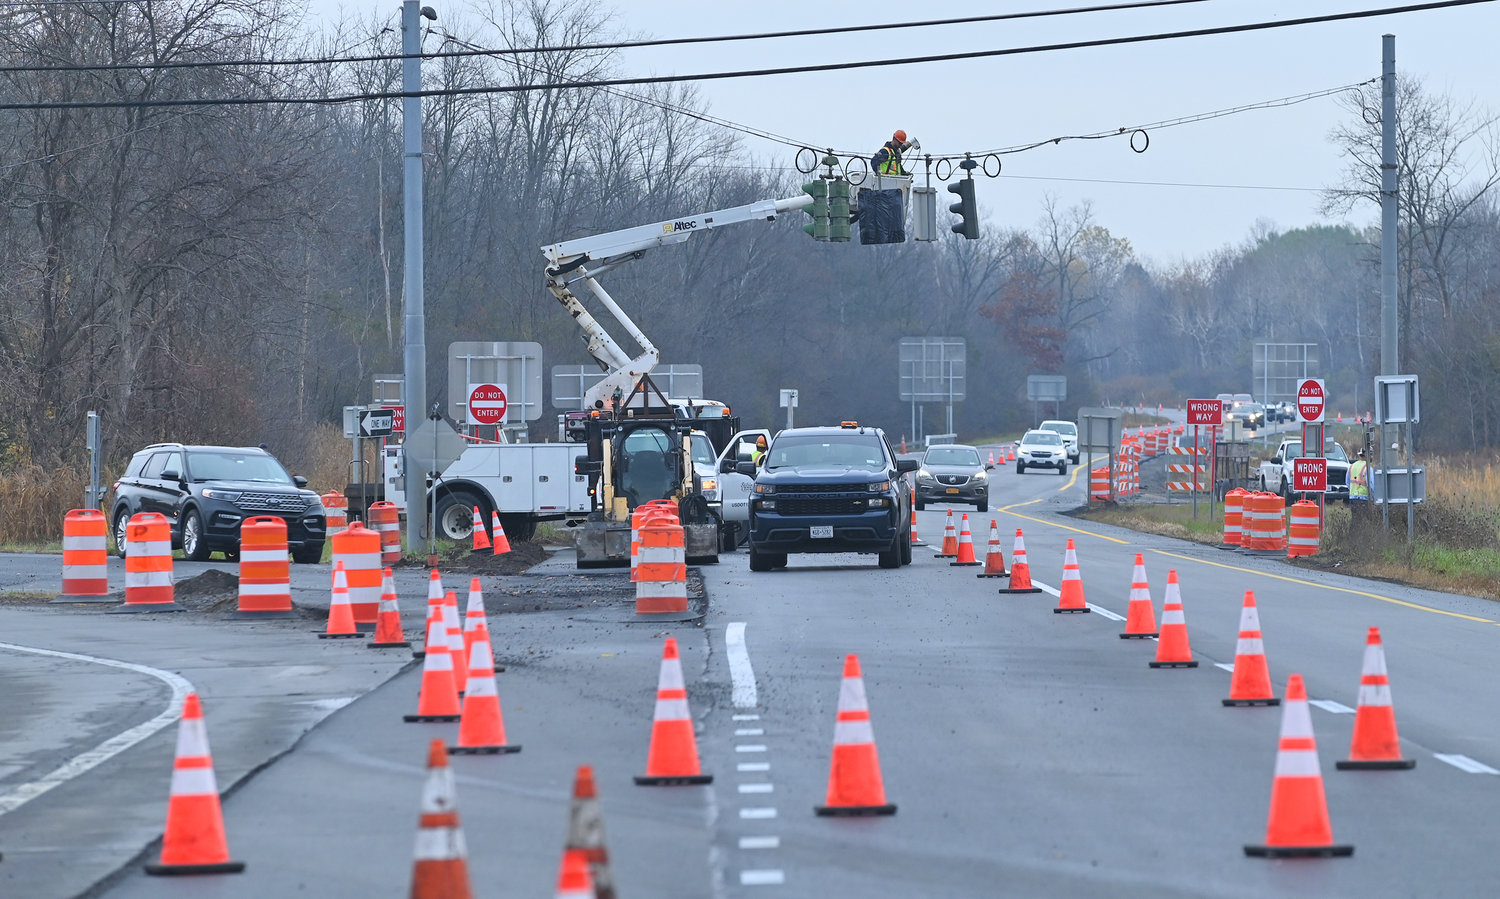 The traffic lights are coming down at the intersection of South James Street and Route 365 in south Rome.